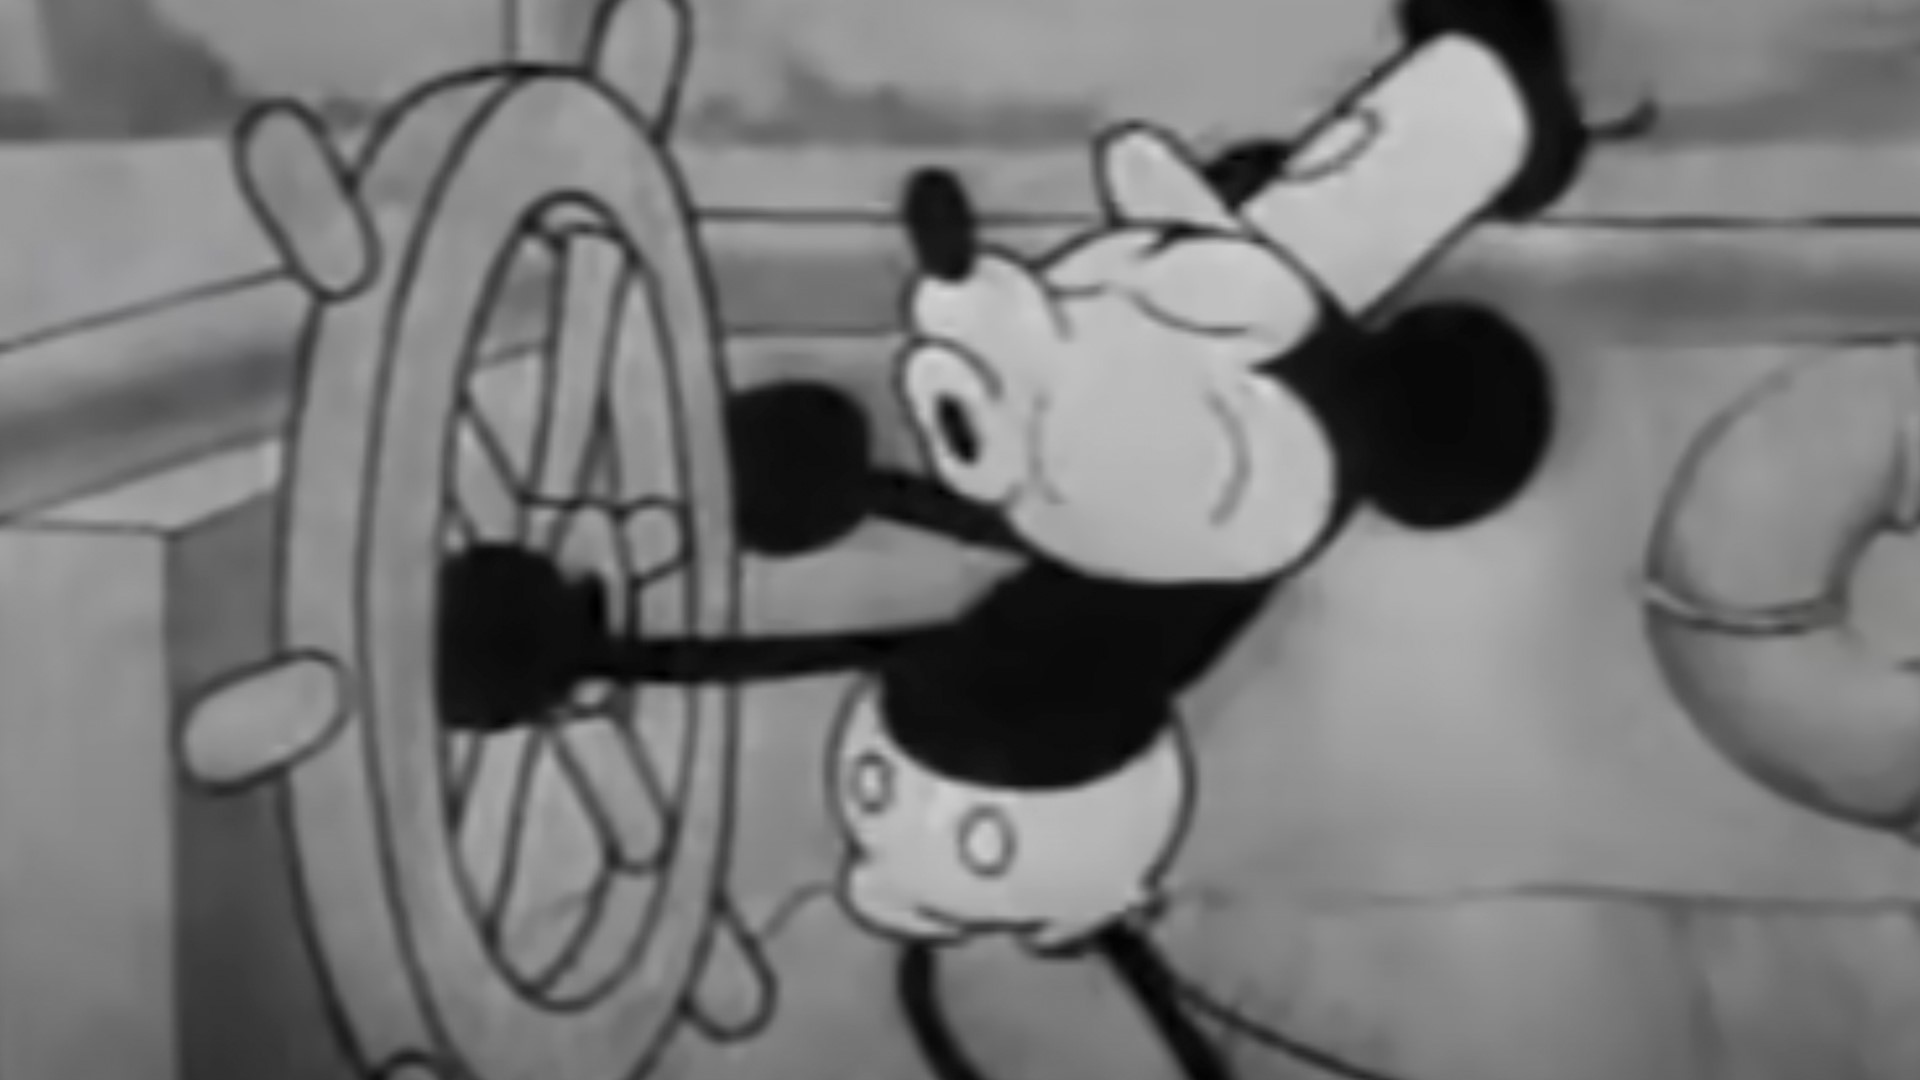 Disney likely seeing copyrights to 'Winnie the Pooh' expire